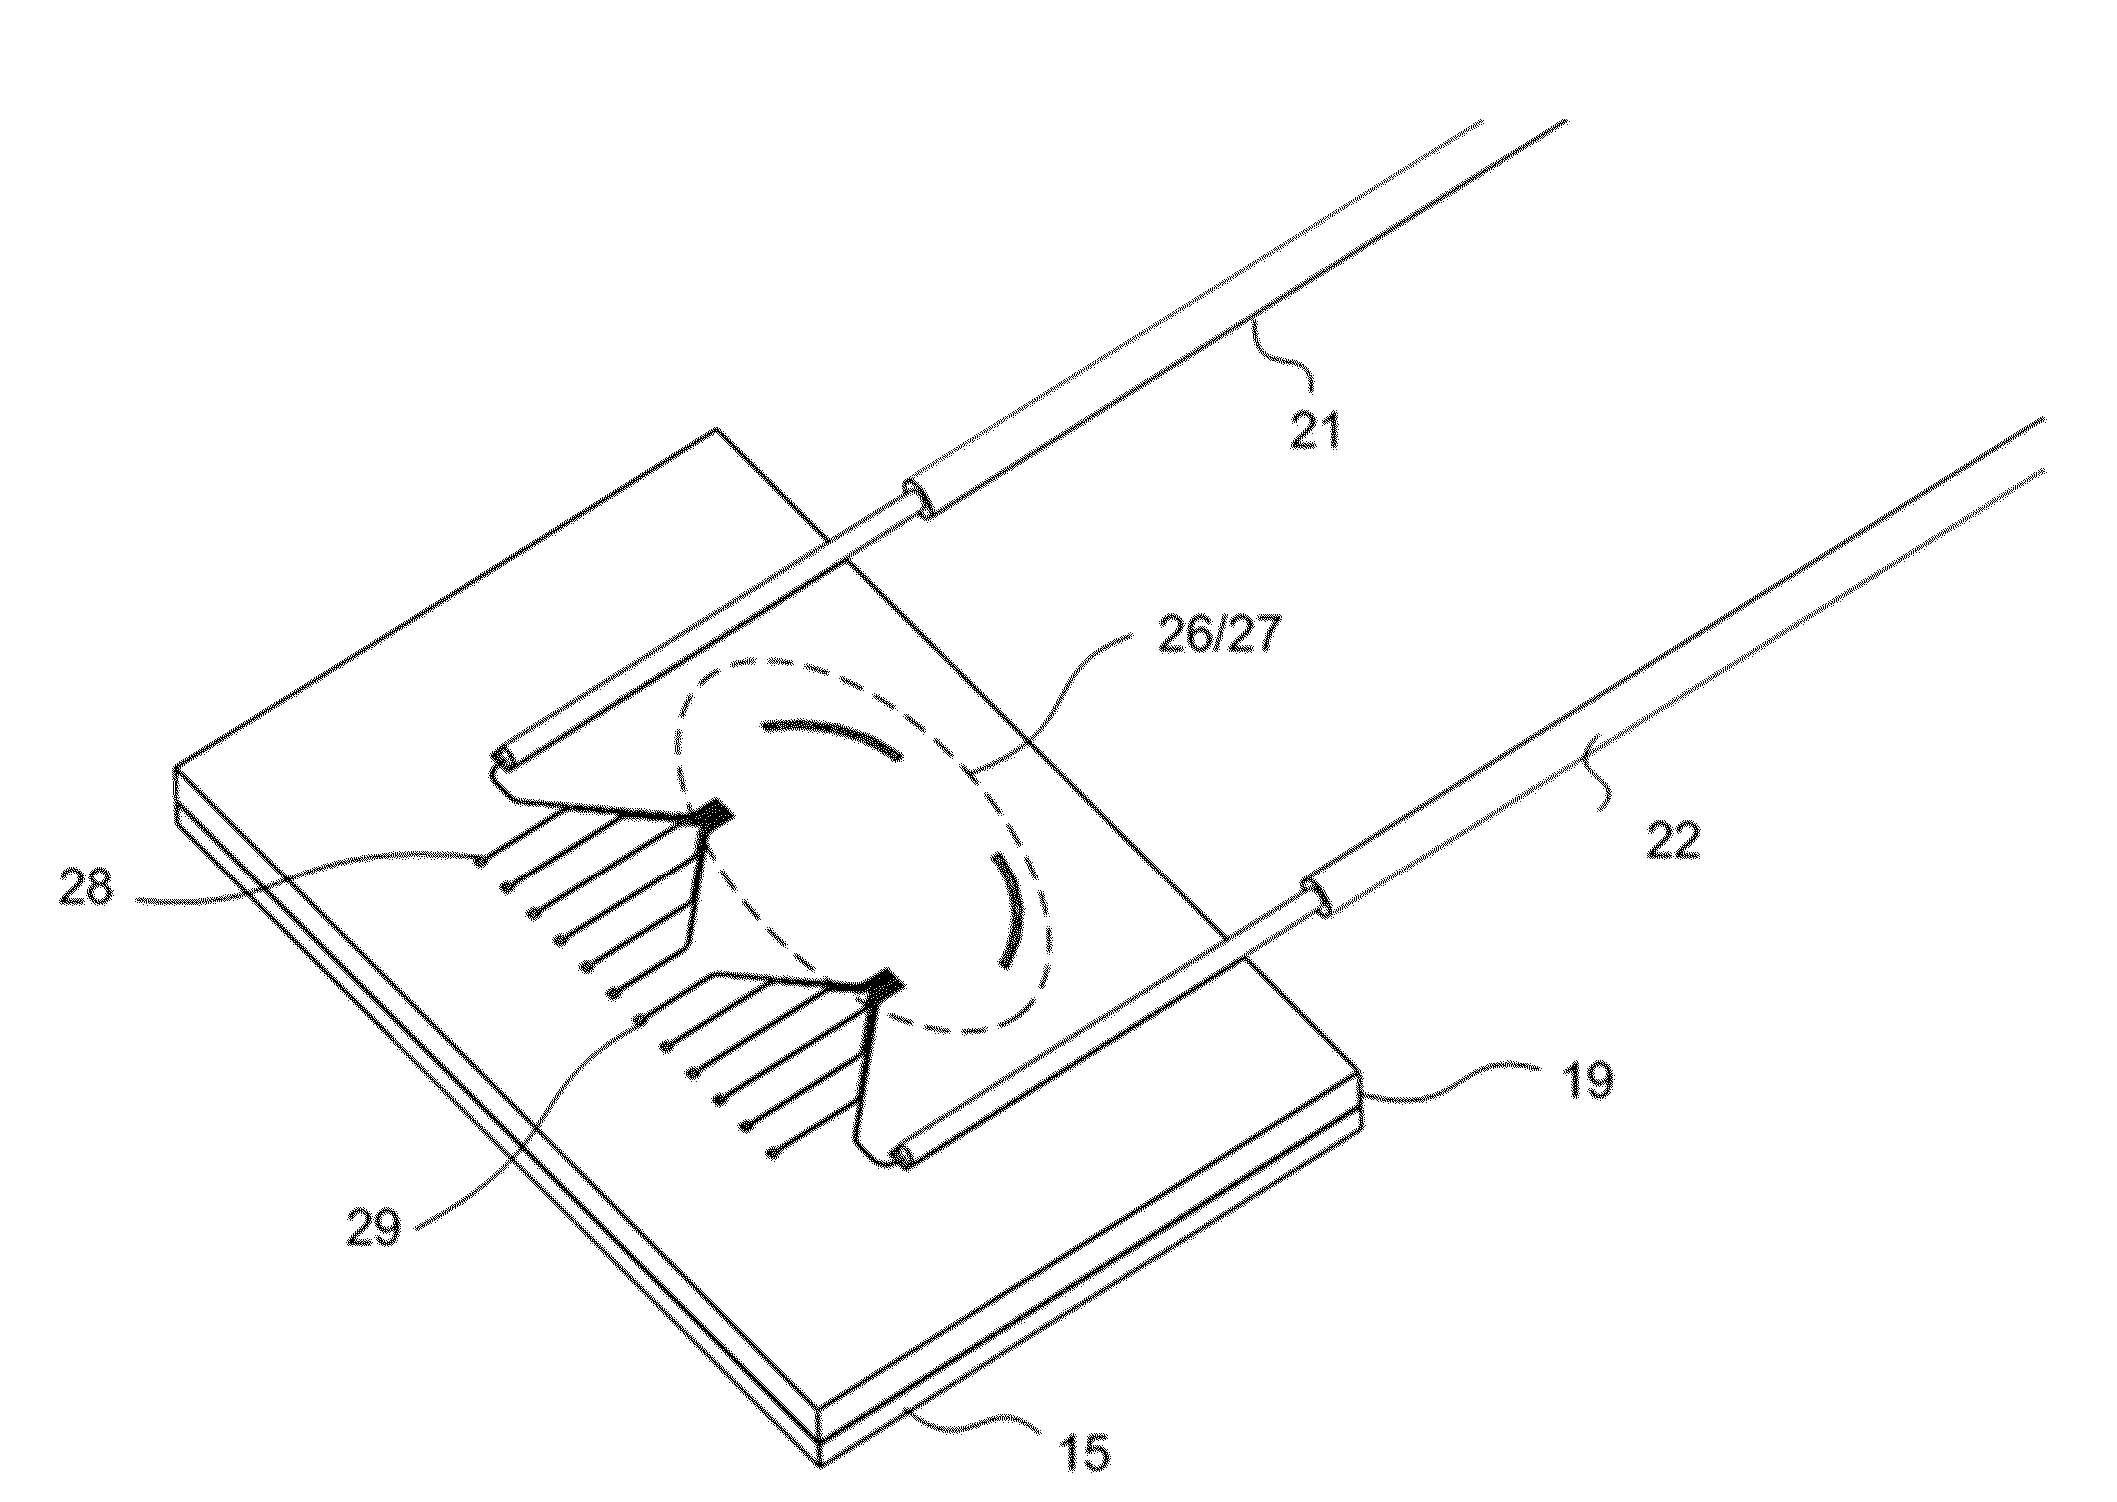 Optical module including silicon photonics chip and coupler chip